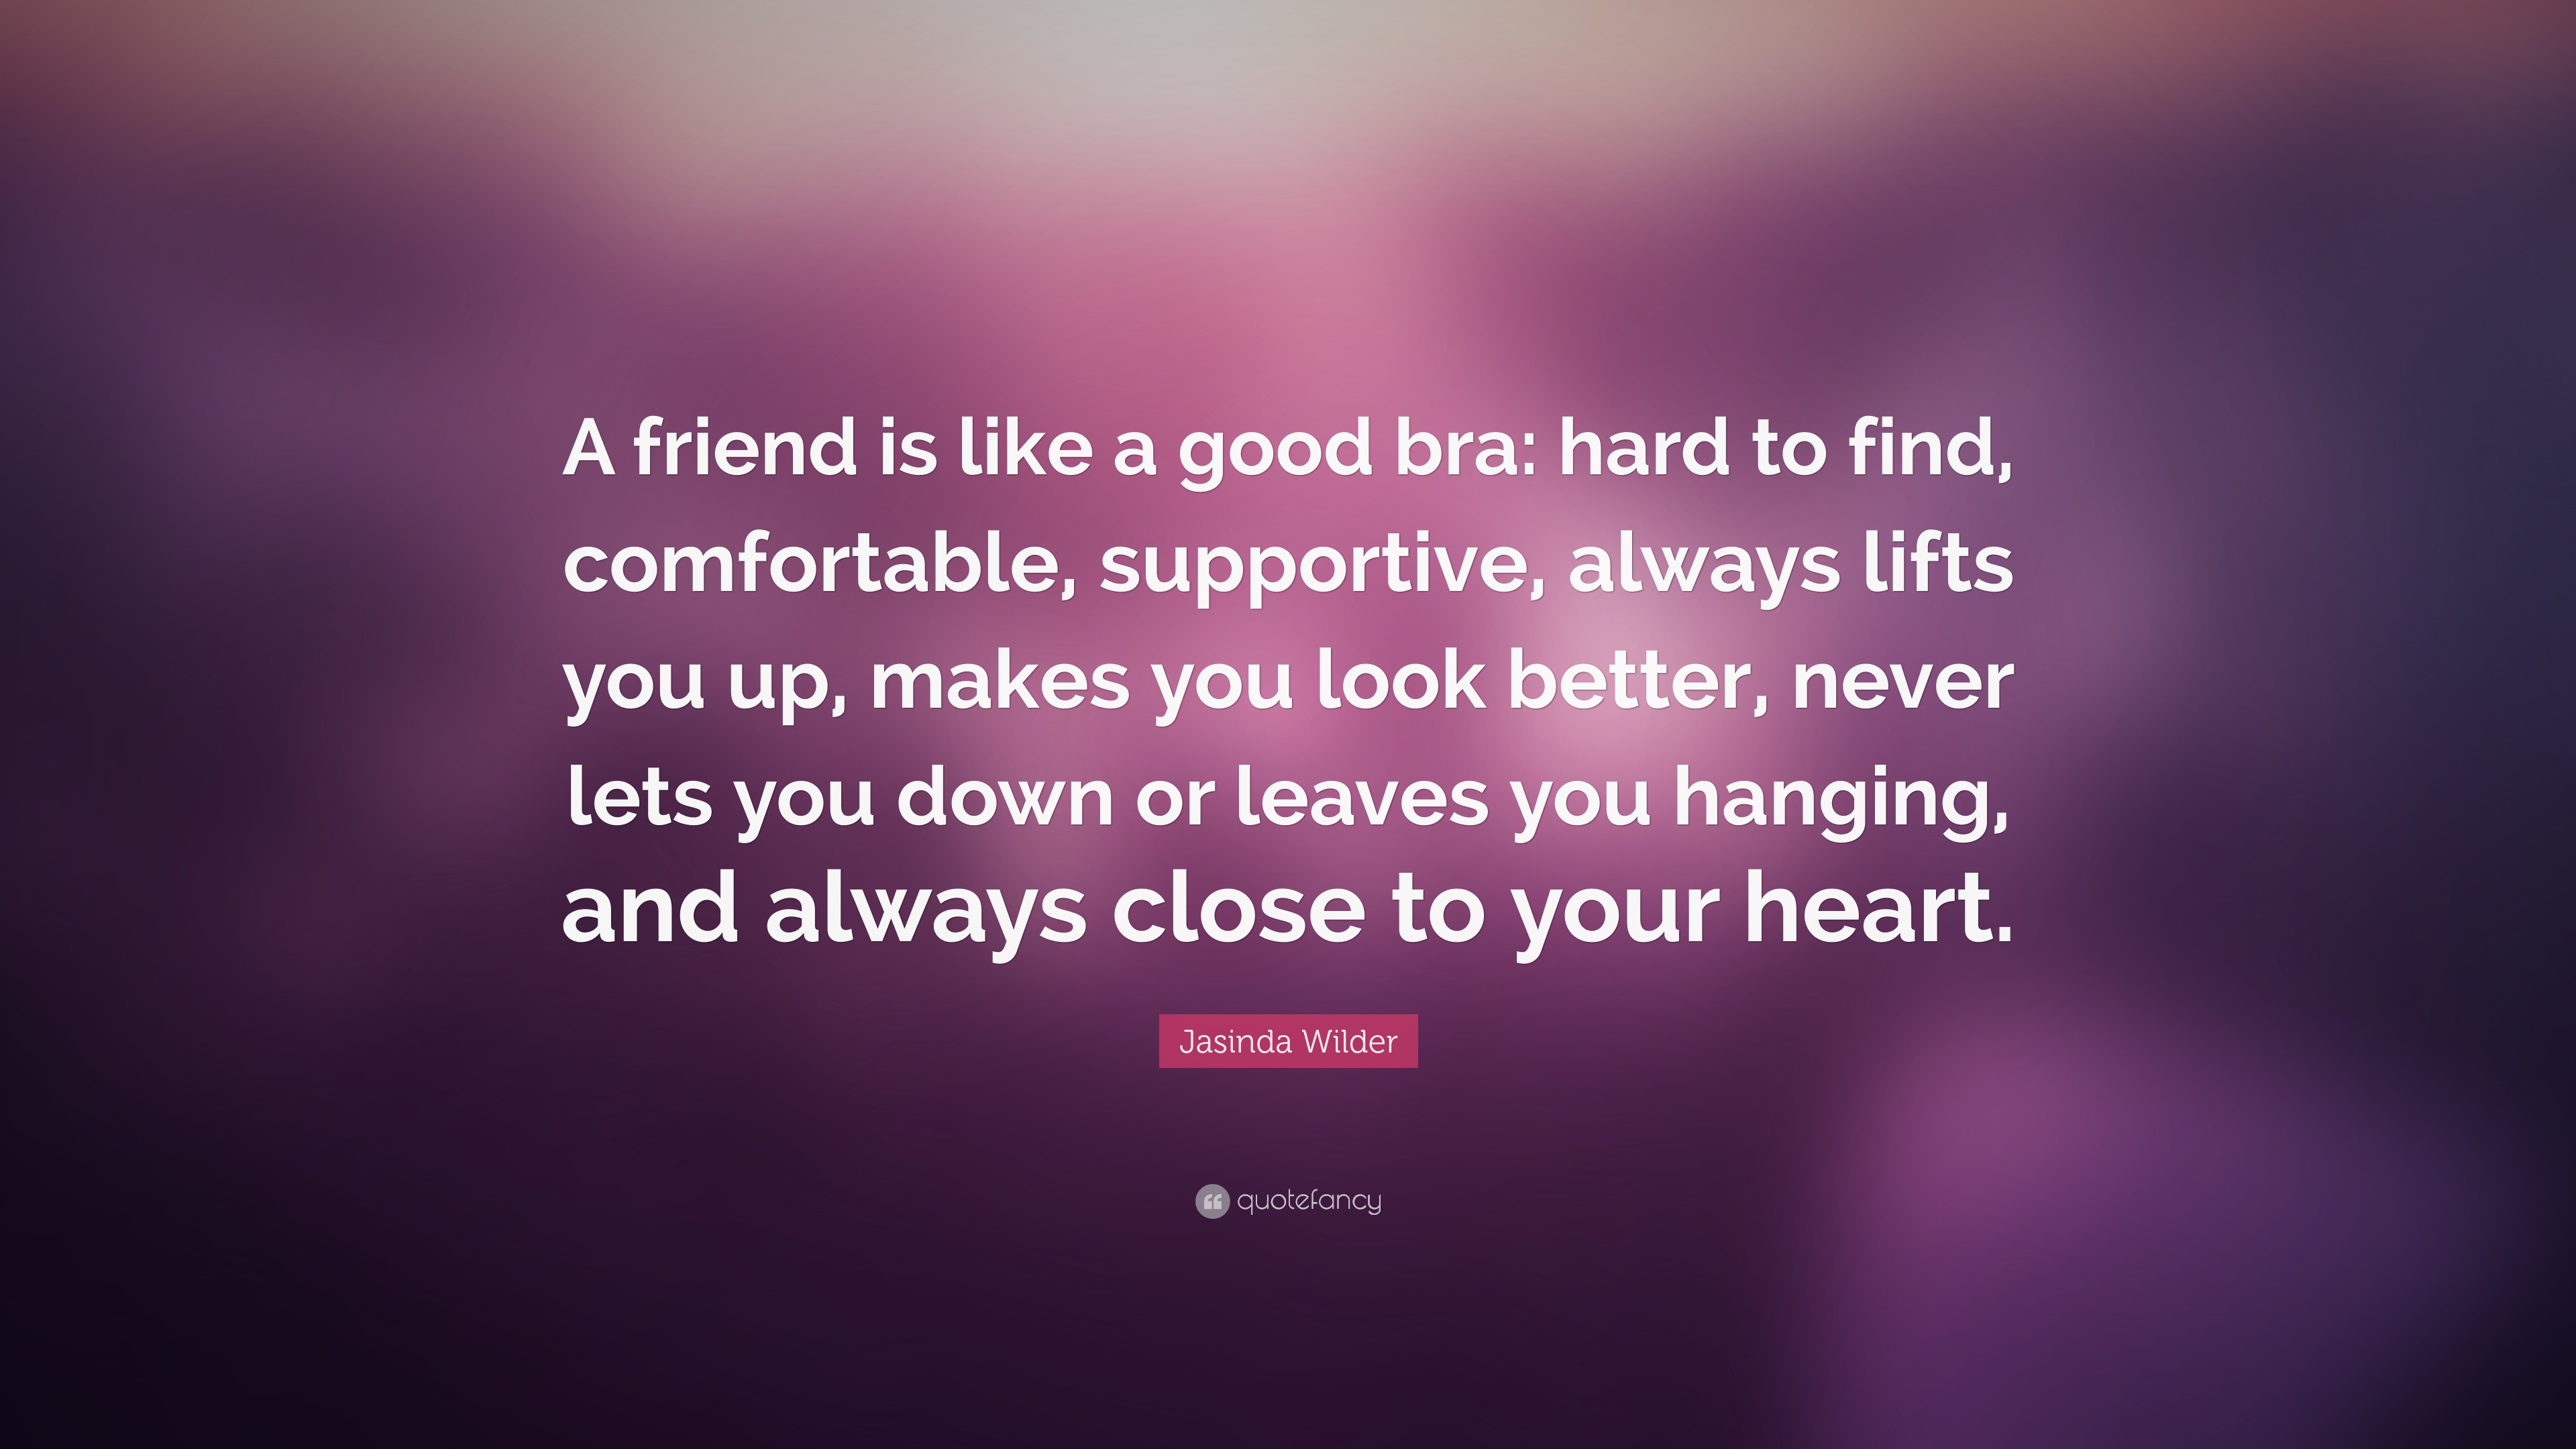 Quick Quotes. A good friend is like a bra – PictureMyPast